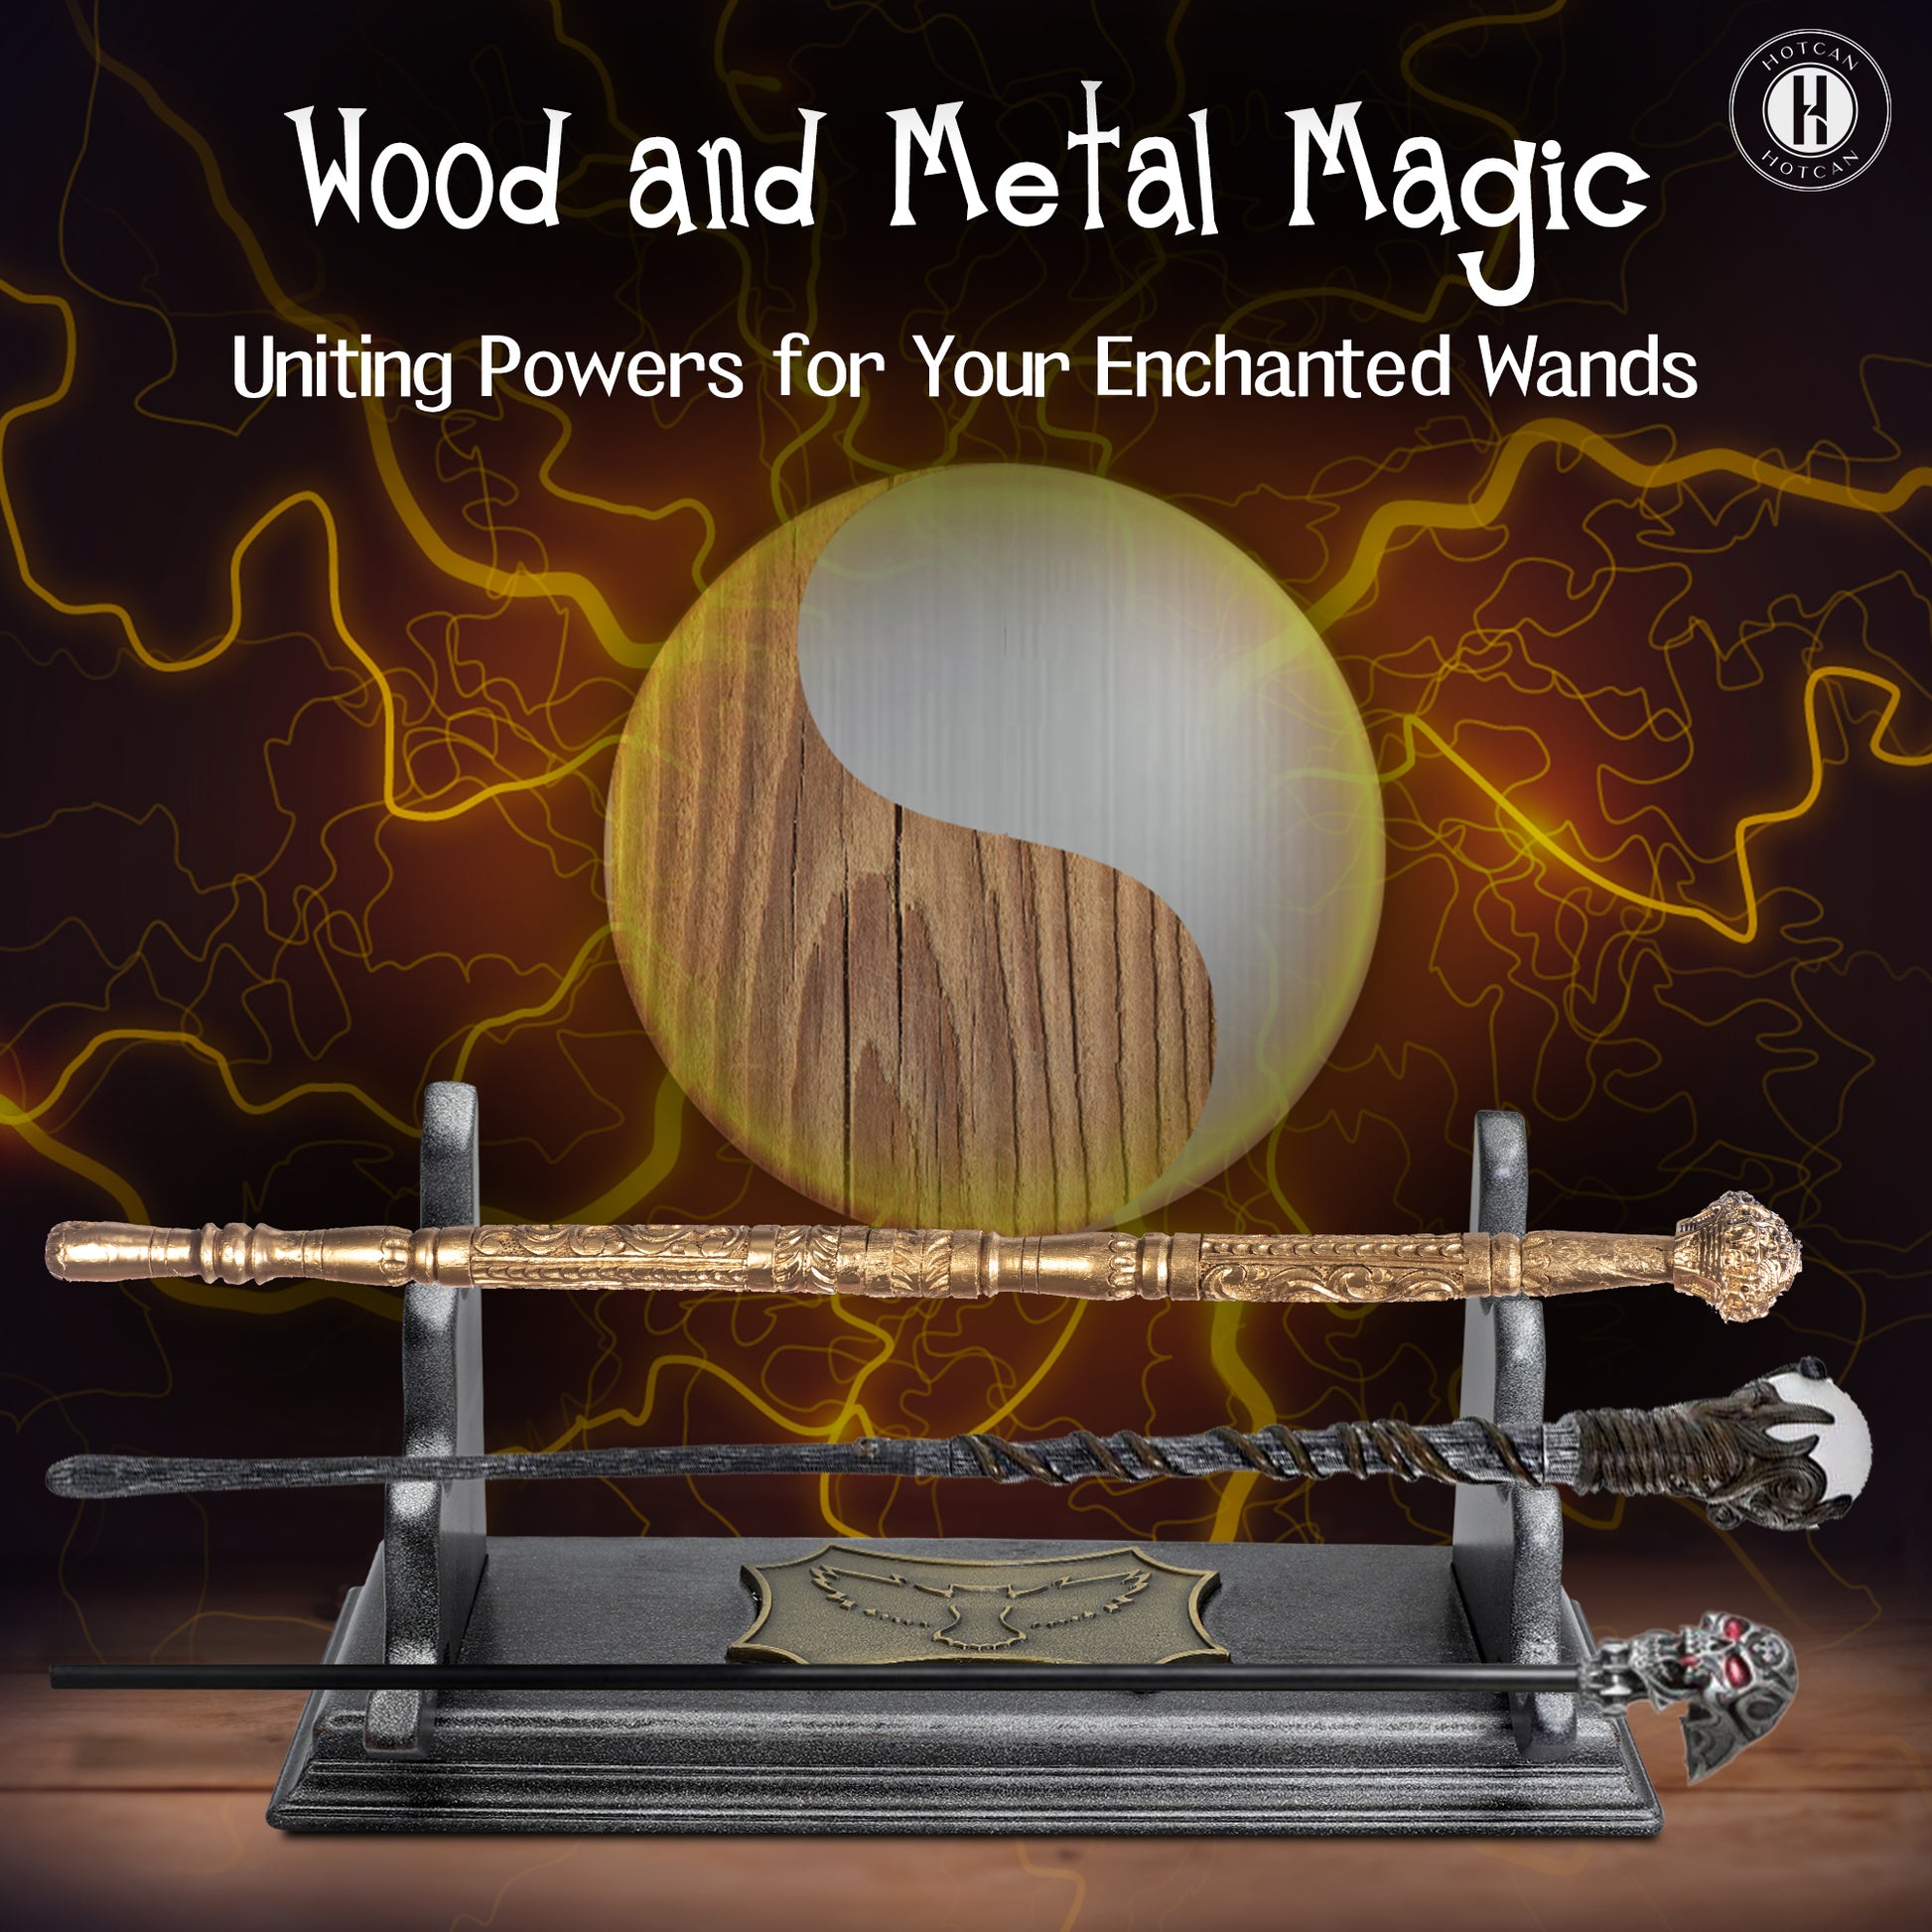 HOTCAN Wooden Magic Wand Holder and Display Stand - Mystical Fusion of